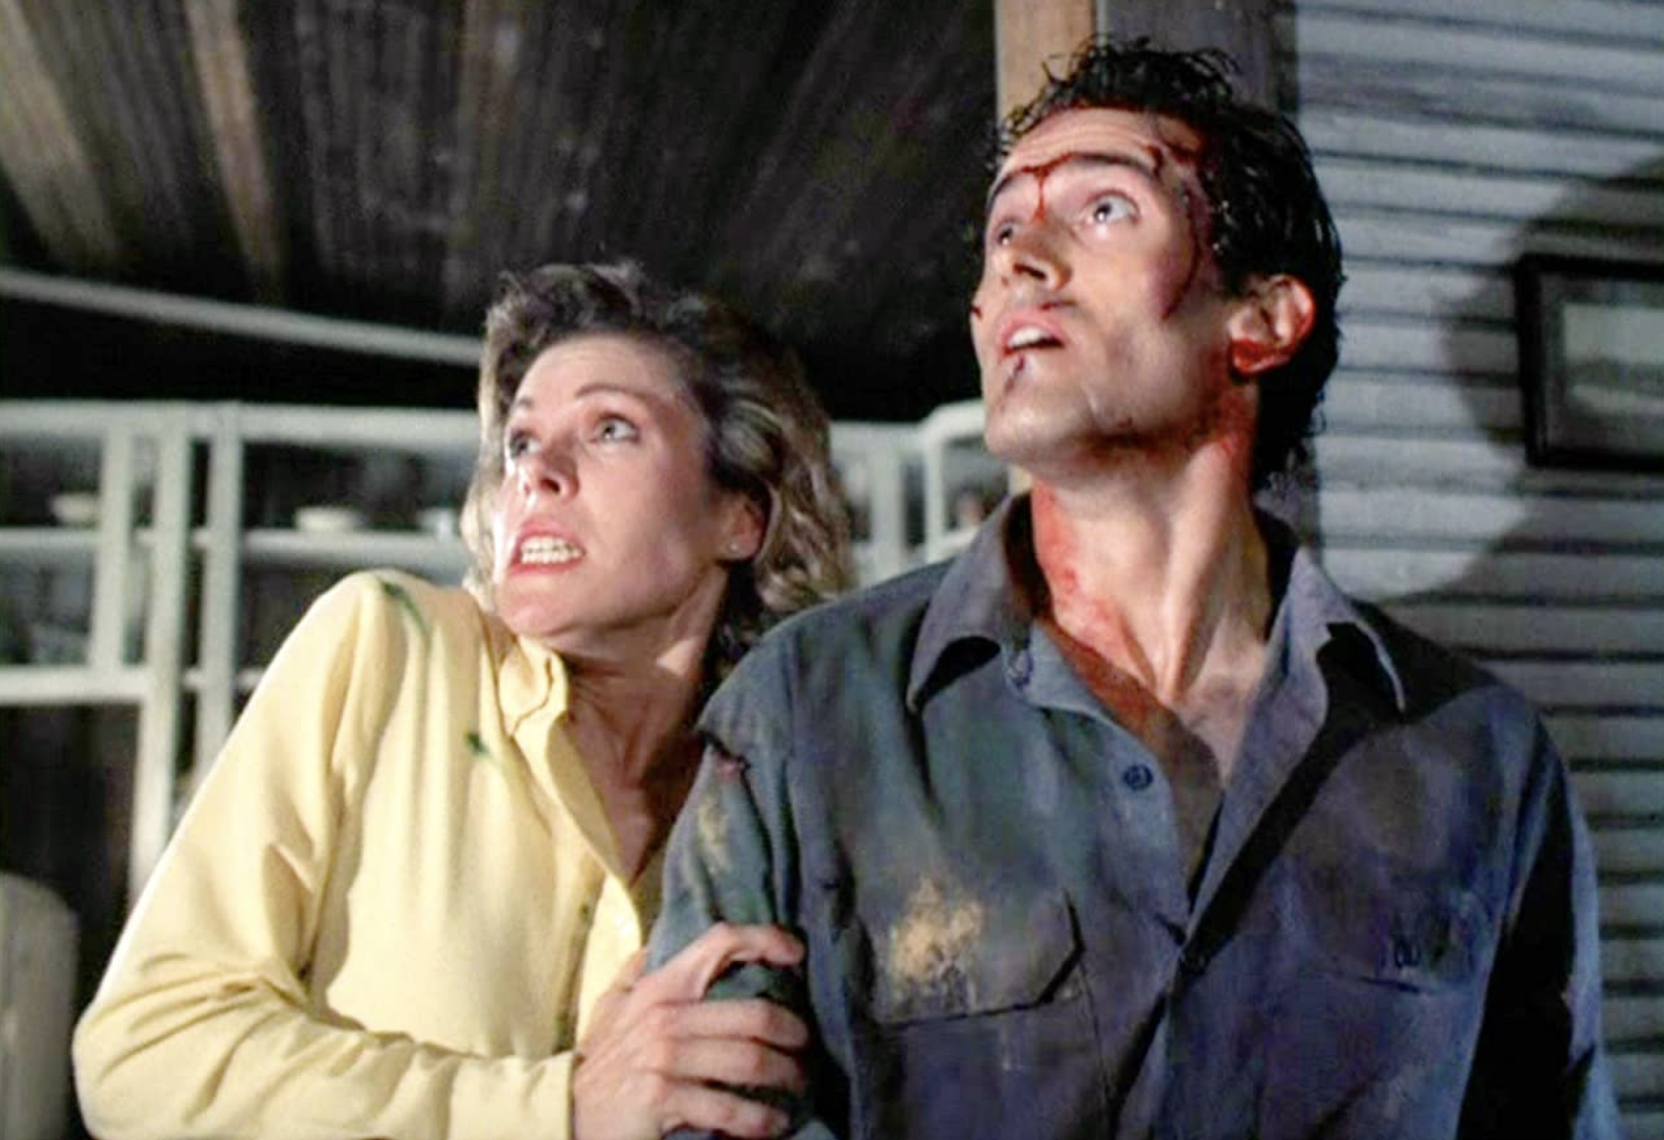 Bruce Campbell returns with online sequel screening of Evil Dead II